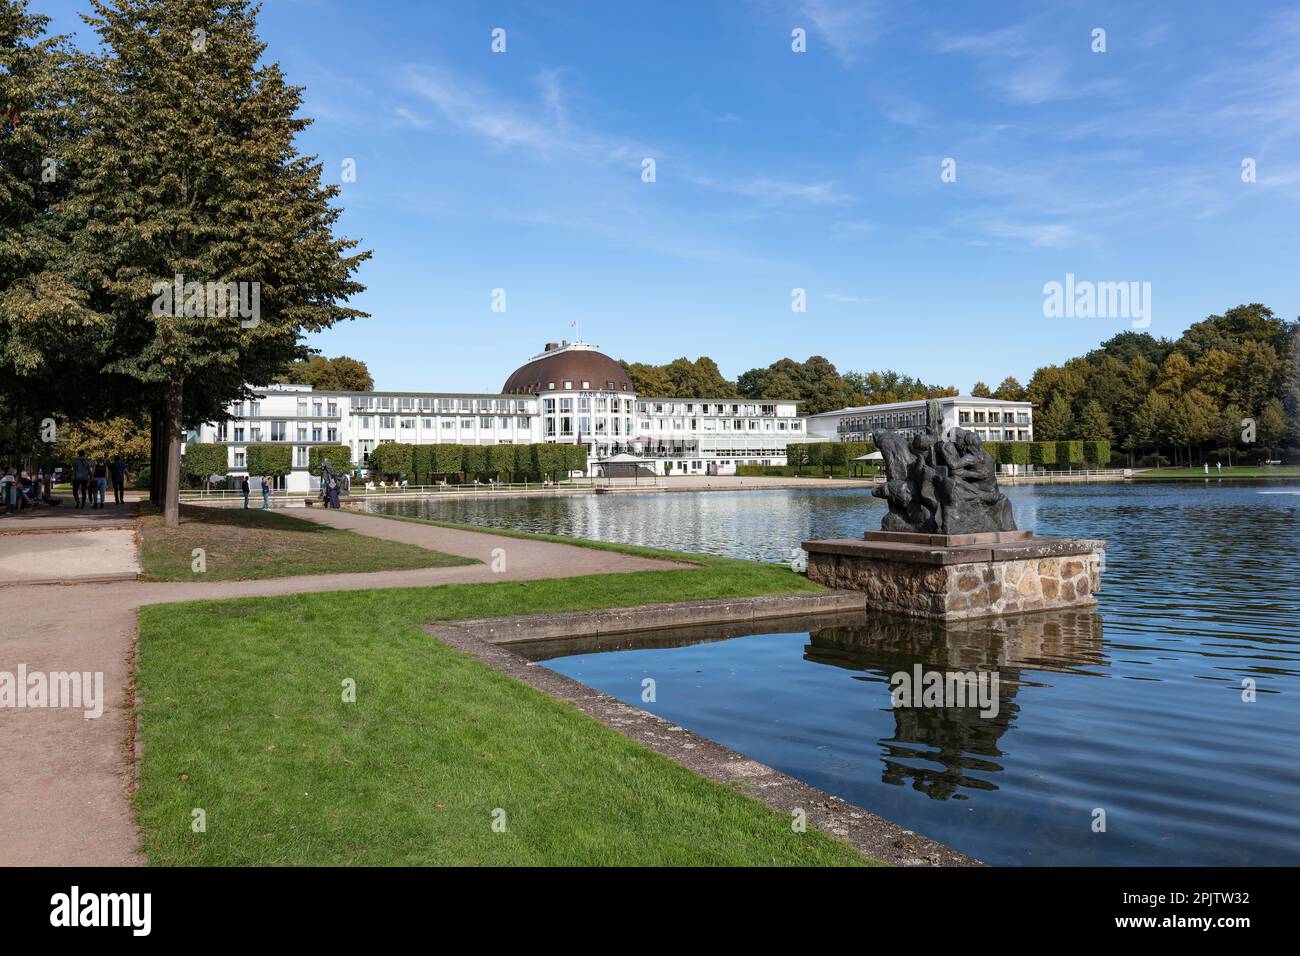 Park Hotel by serene, peaceful Hollersee lake in Burgerpark with gardens, lakes, parkland. Four seasons Spring sculpture by Bernd Altenstein. Bremen. Stock Photo